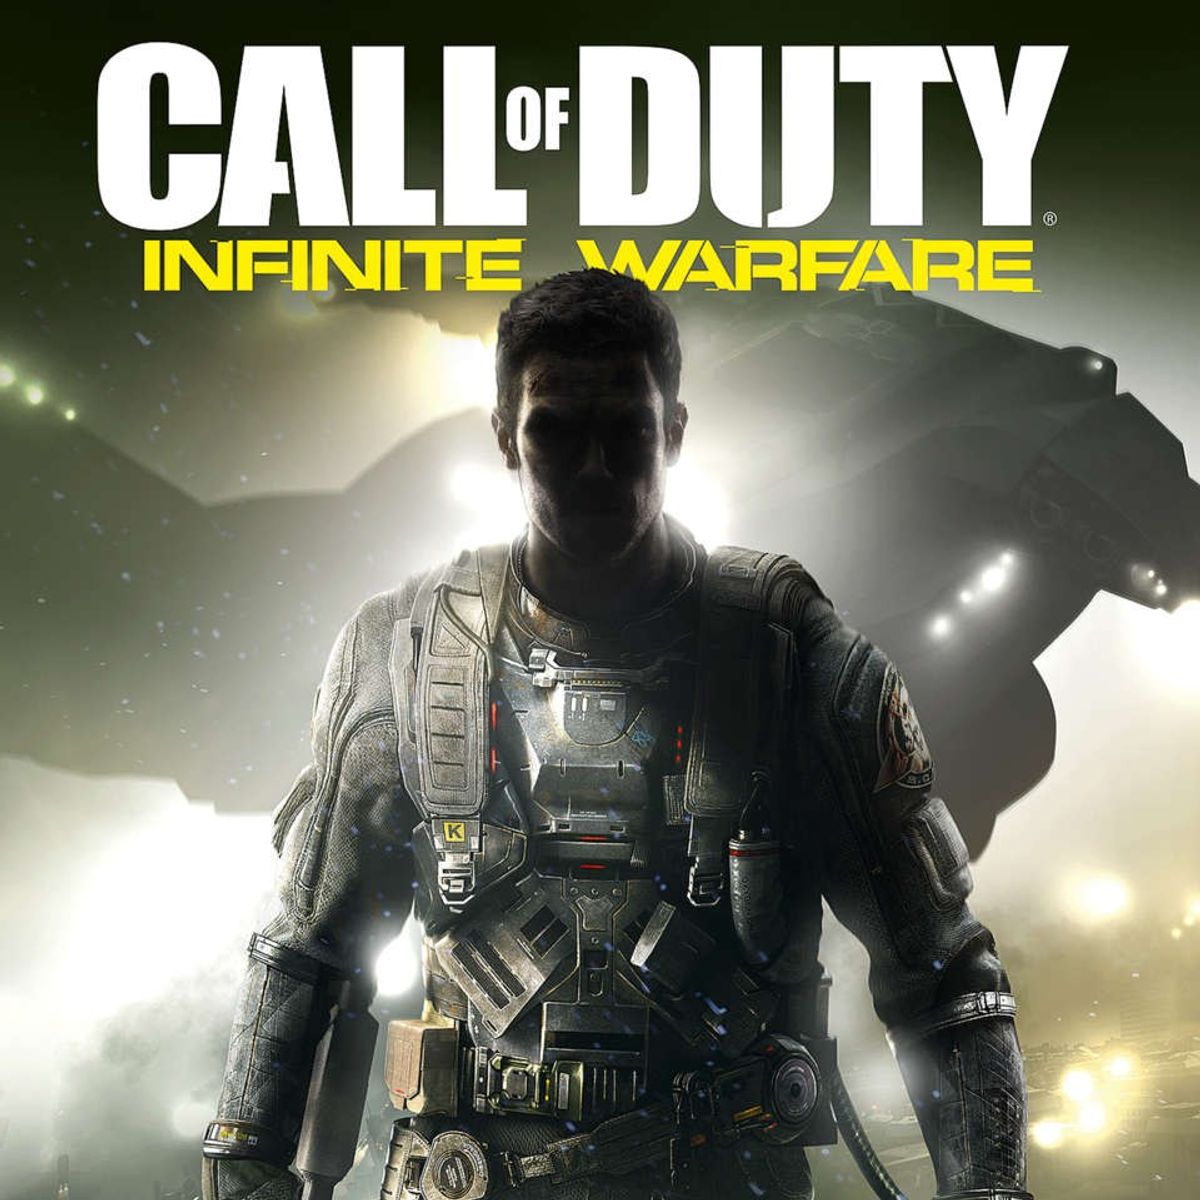 Timothy Seguia's one sided view on Call of Duty: Infinite Warfare